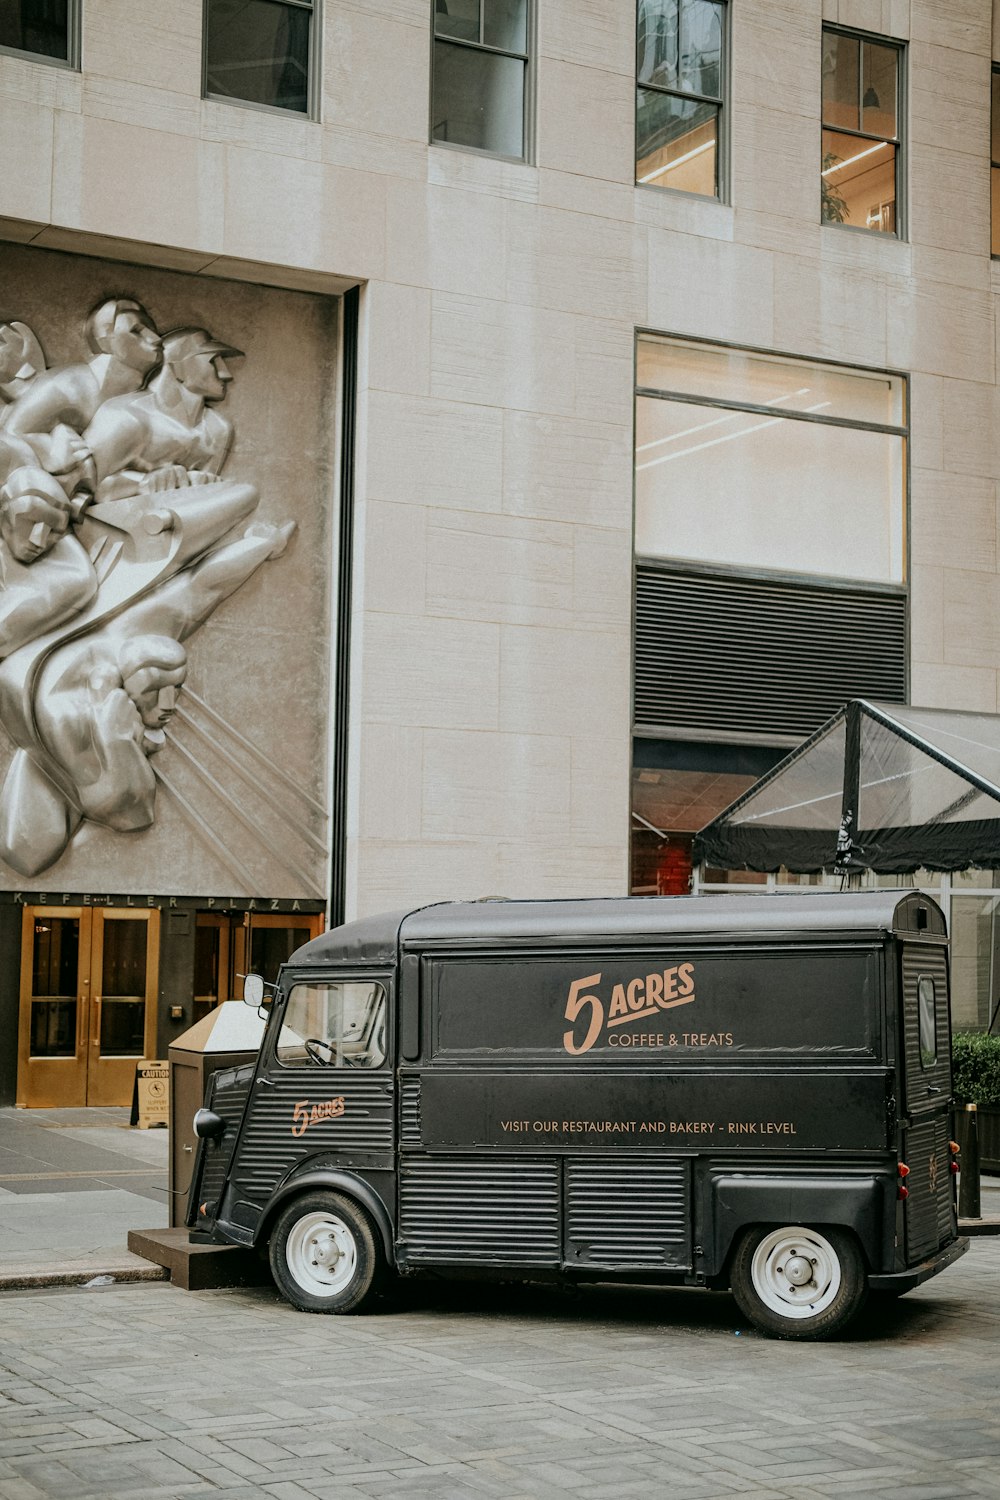 a food truck parked in front of a building